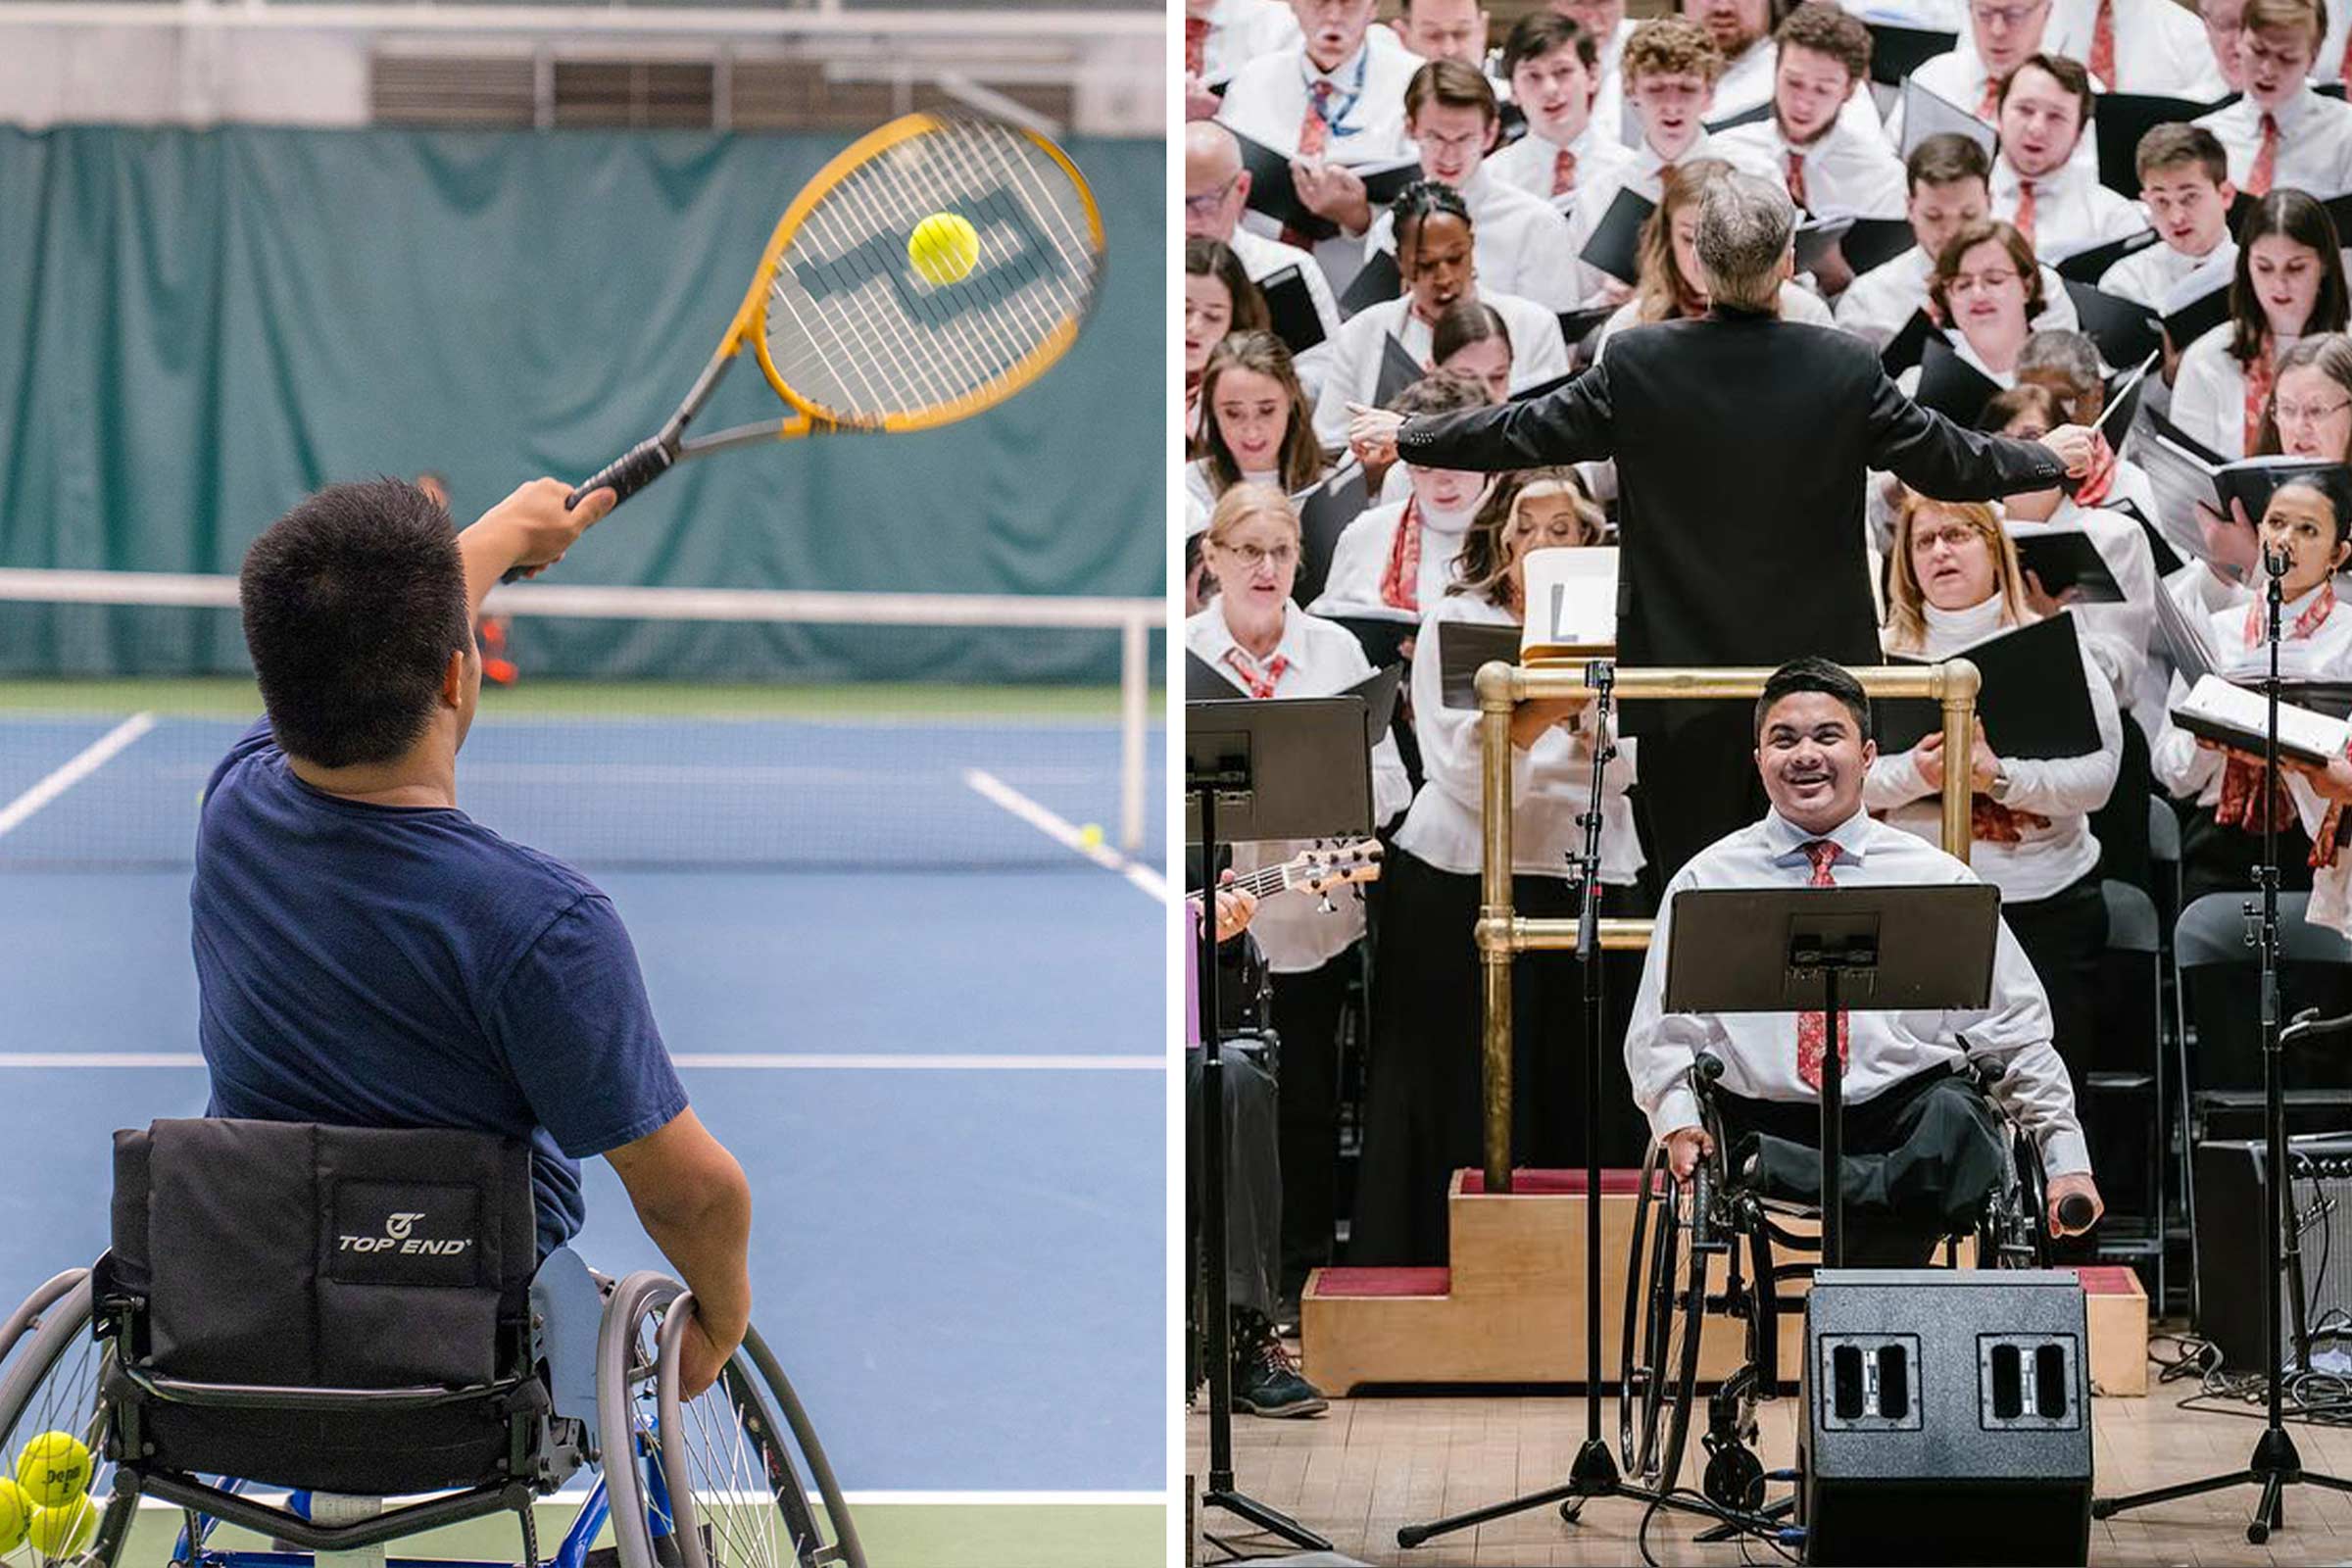 Camano playing tennis, left, and performing solo, right